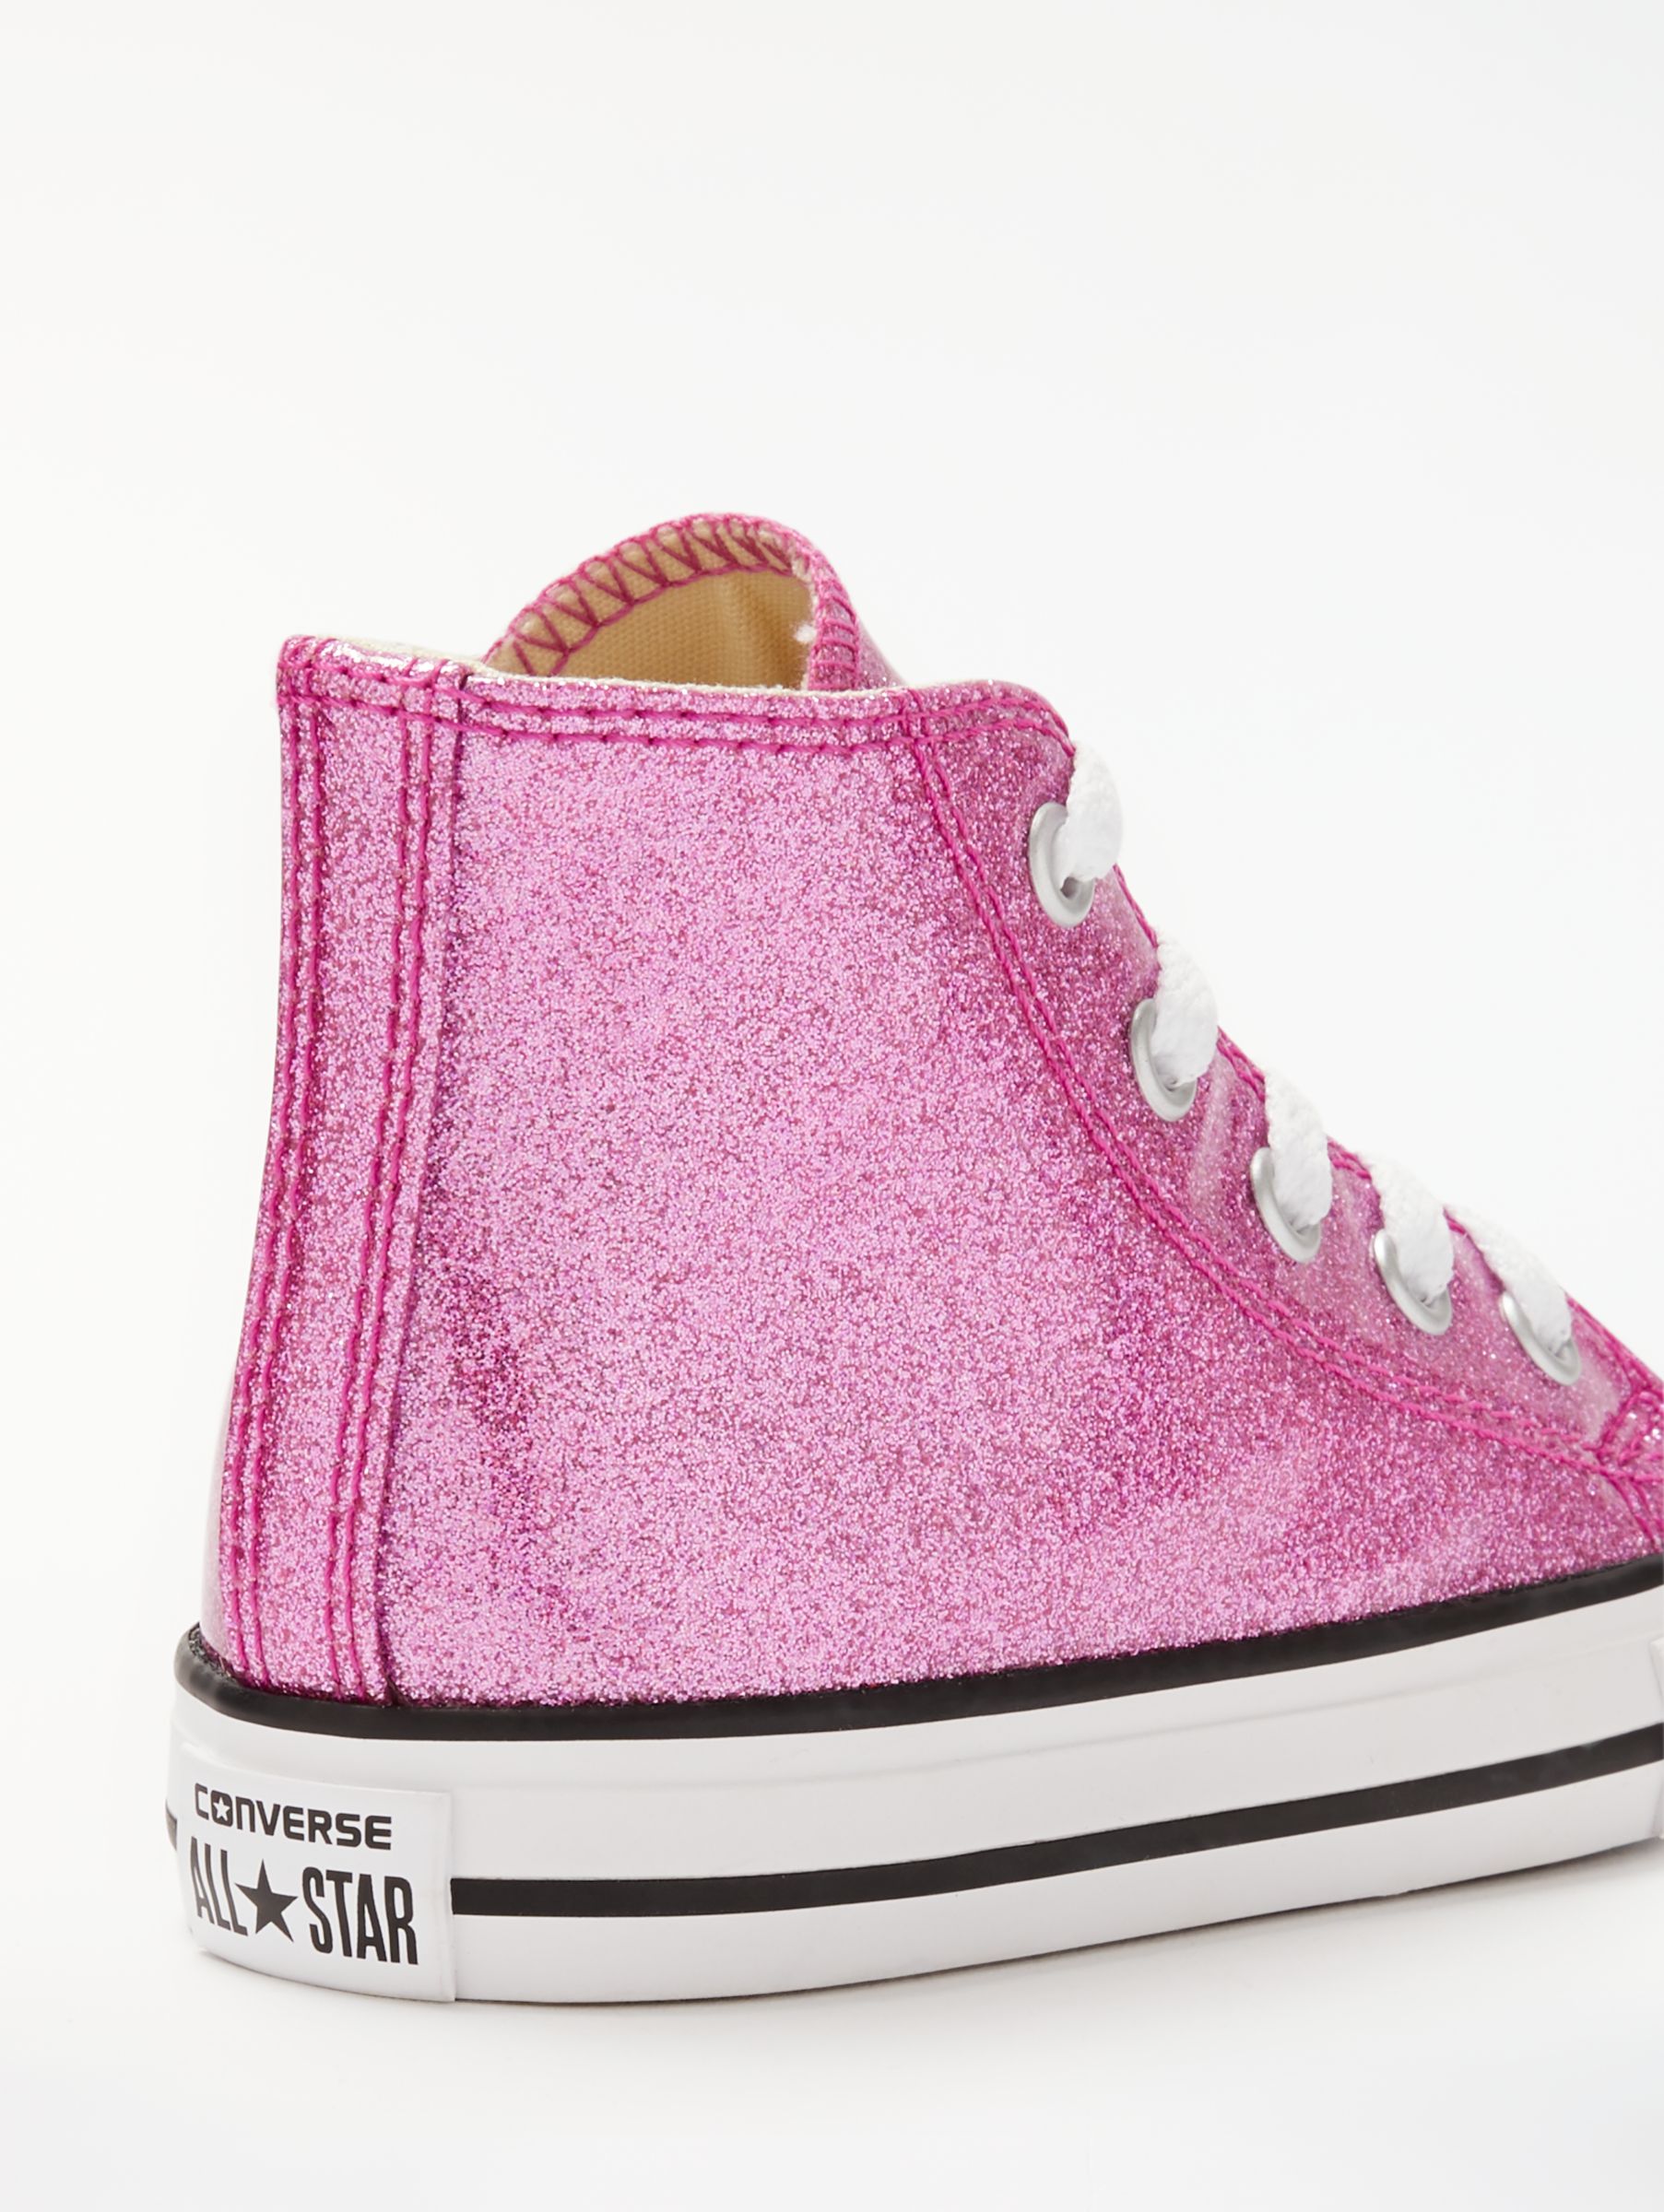 pink sparkly converse high tops